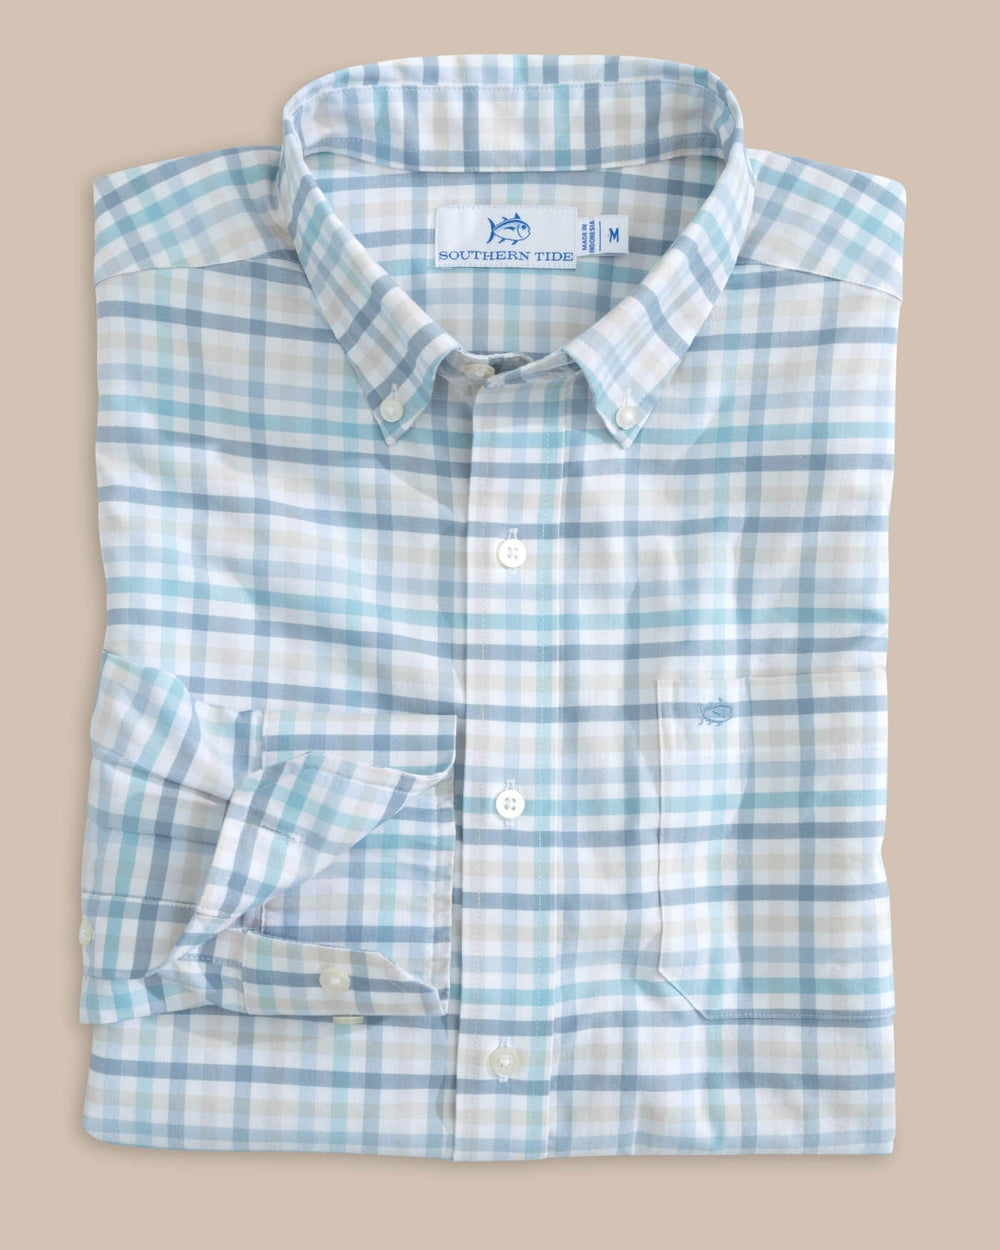 The front view of the Southern Tide Coastal Passage Pelham Gingham Long Sleeve Sport Shirt by Southern Tide - Marine Blue